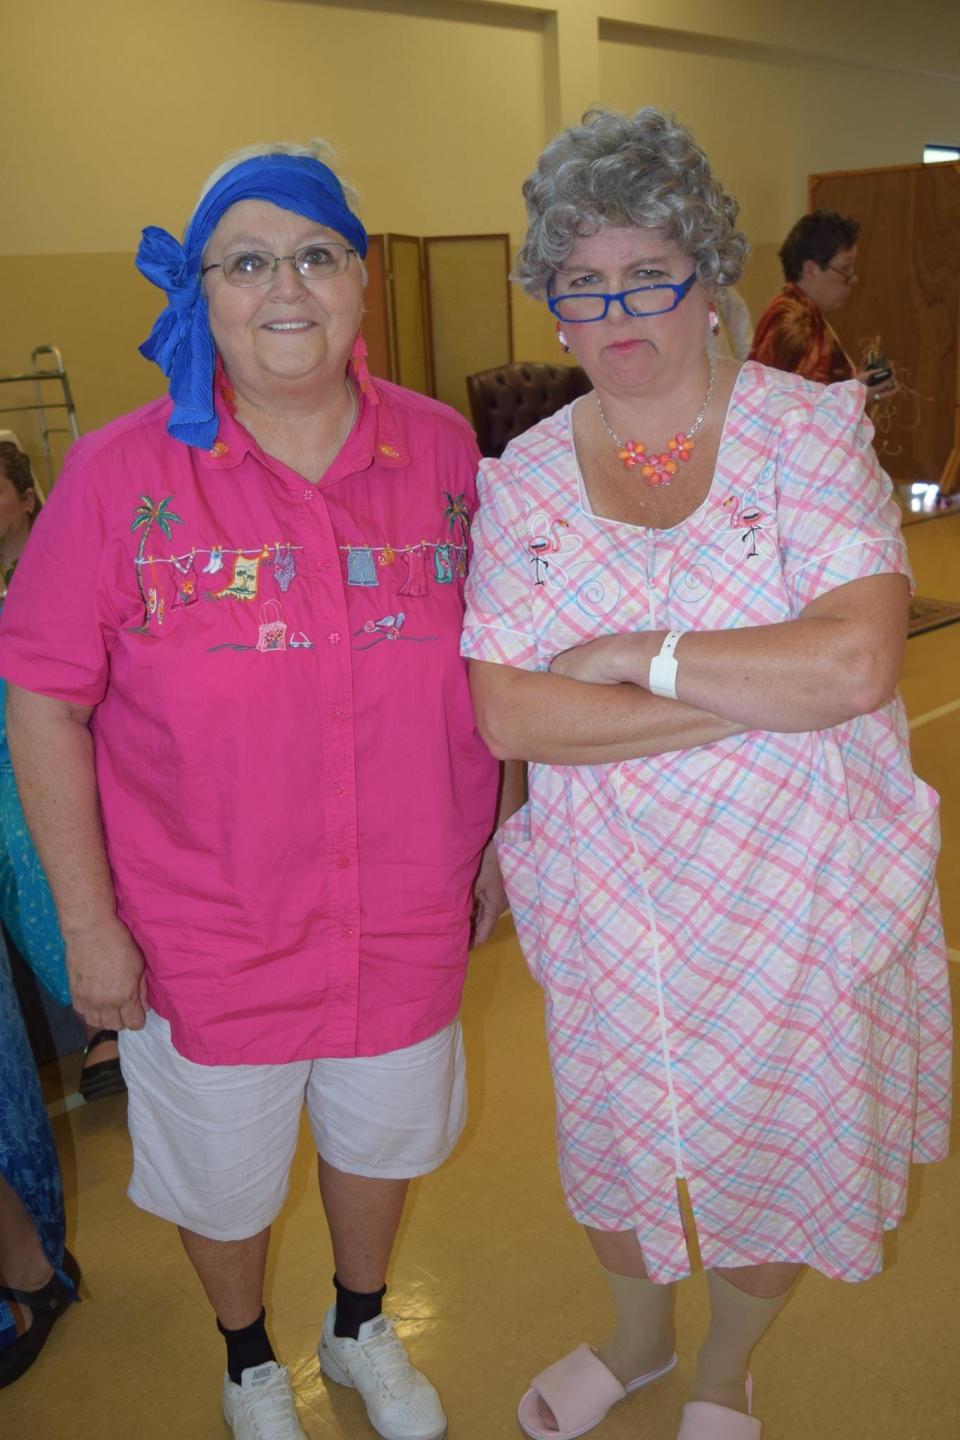 Dagley and Lori Hopper are part of the cast of a Murder Mystery Play fundraiser at Beaver Ridge United Methodist Church in 2017.